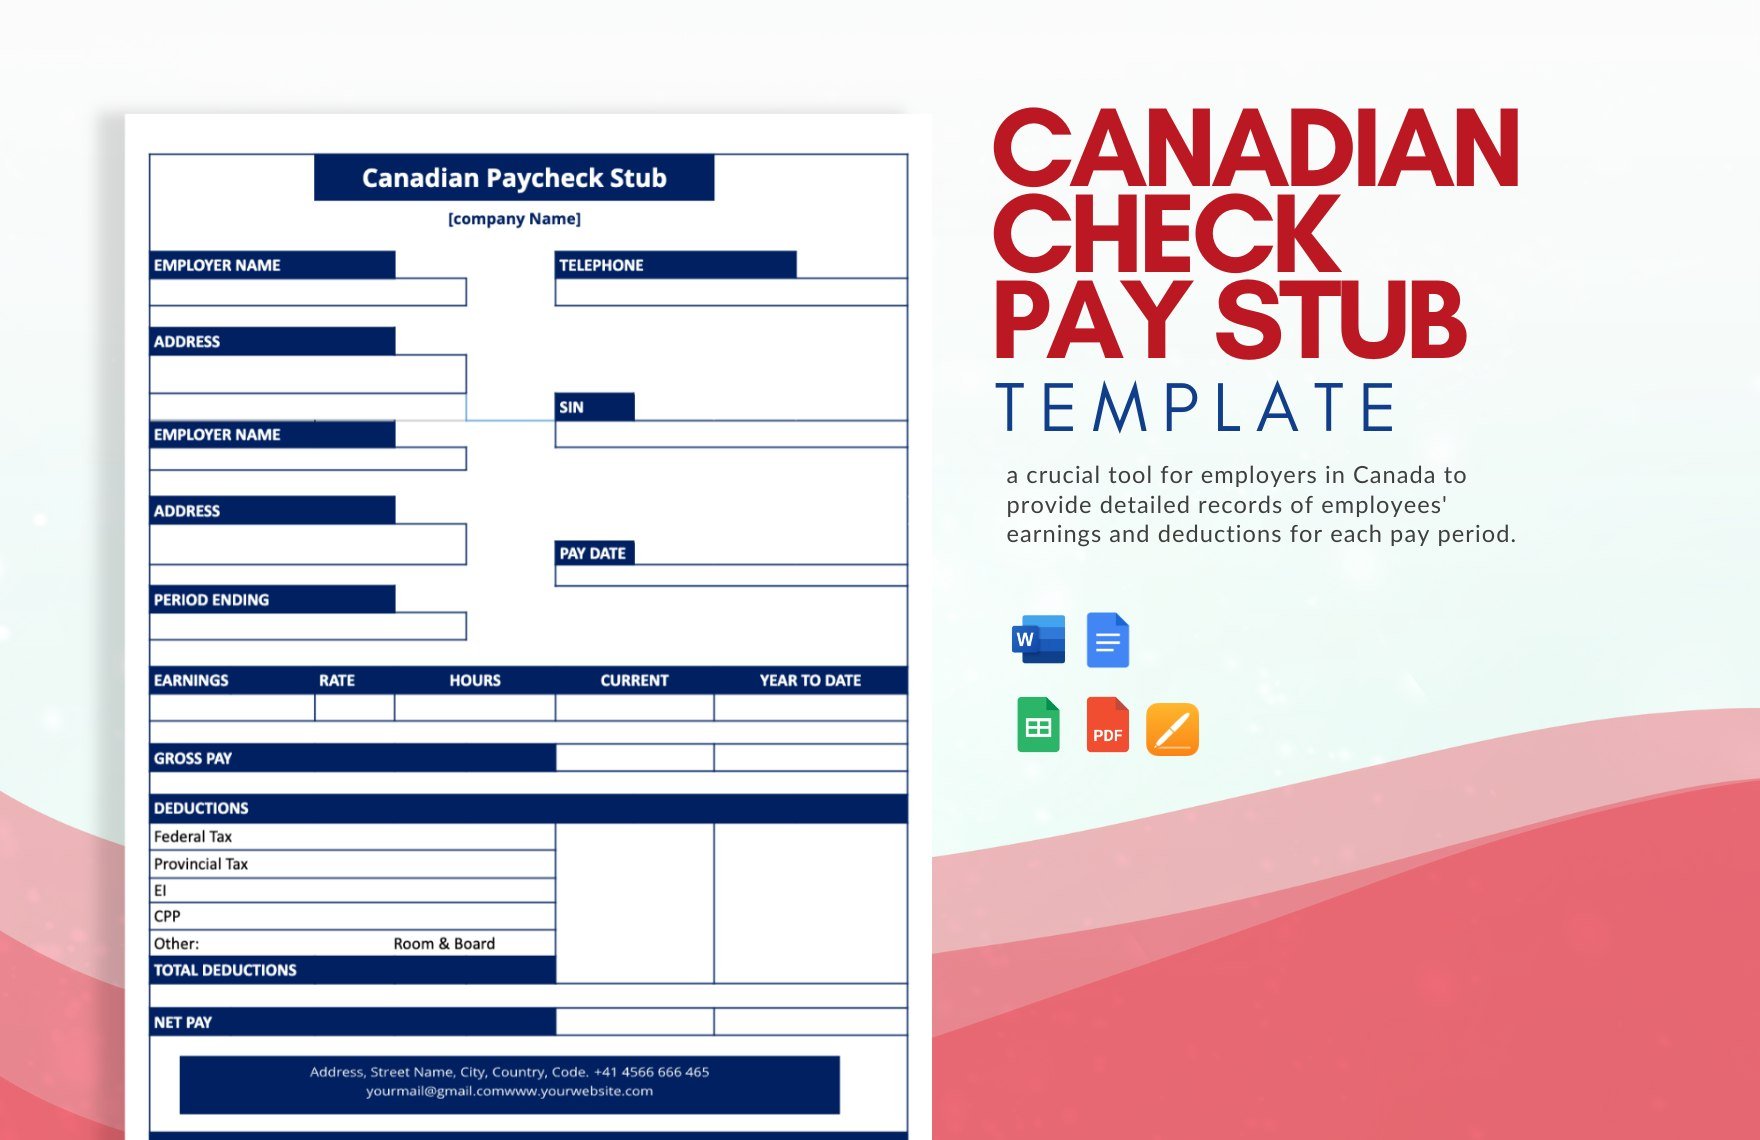 Canadian Check Pay Stub Template in Word, Google Docs, PDF, Google Sheets, Apple Pages